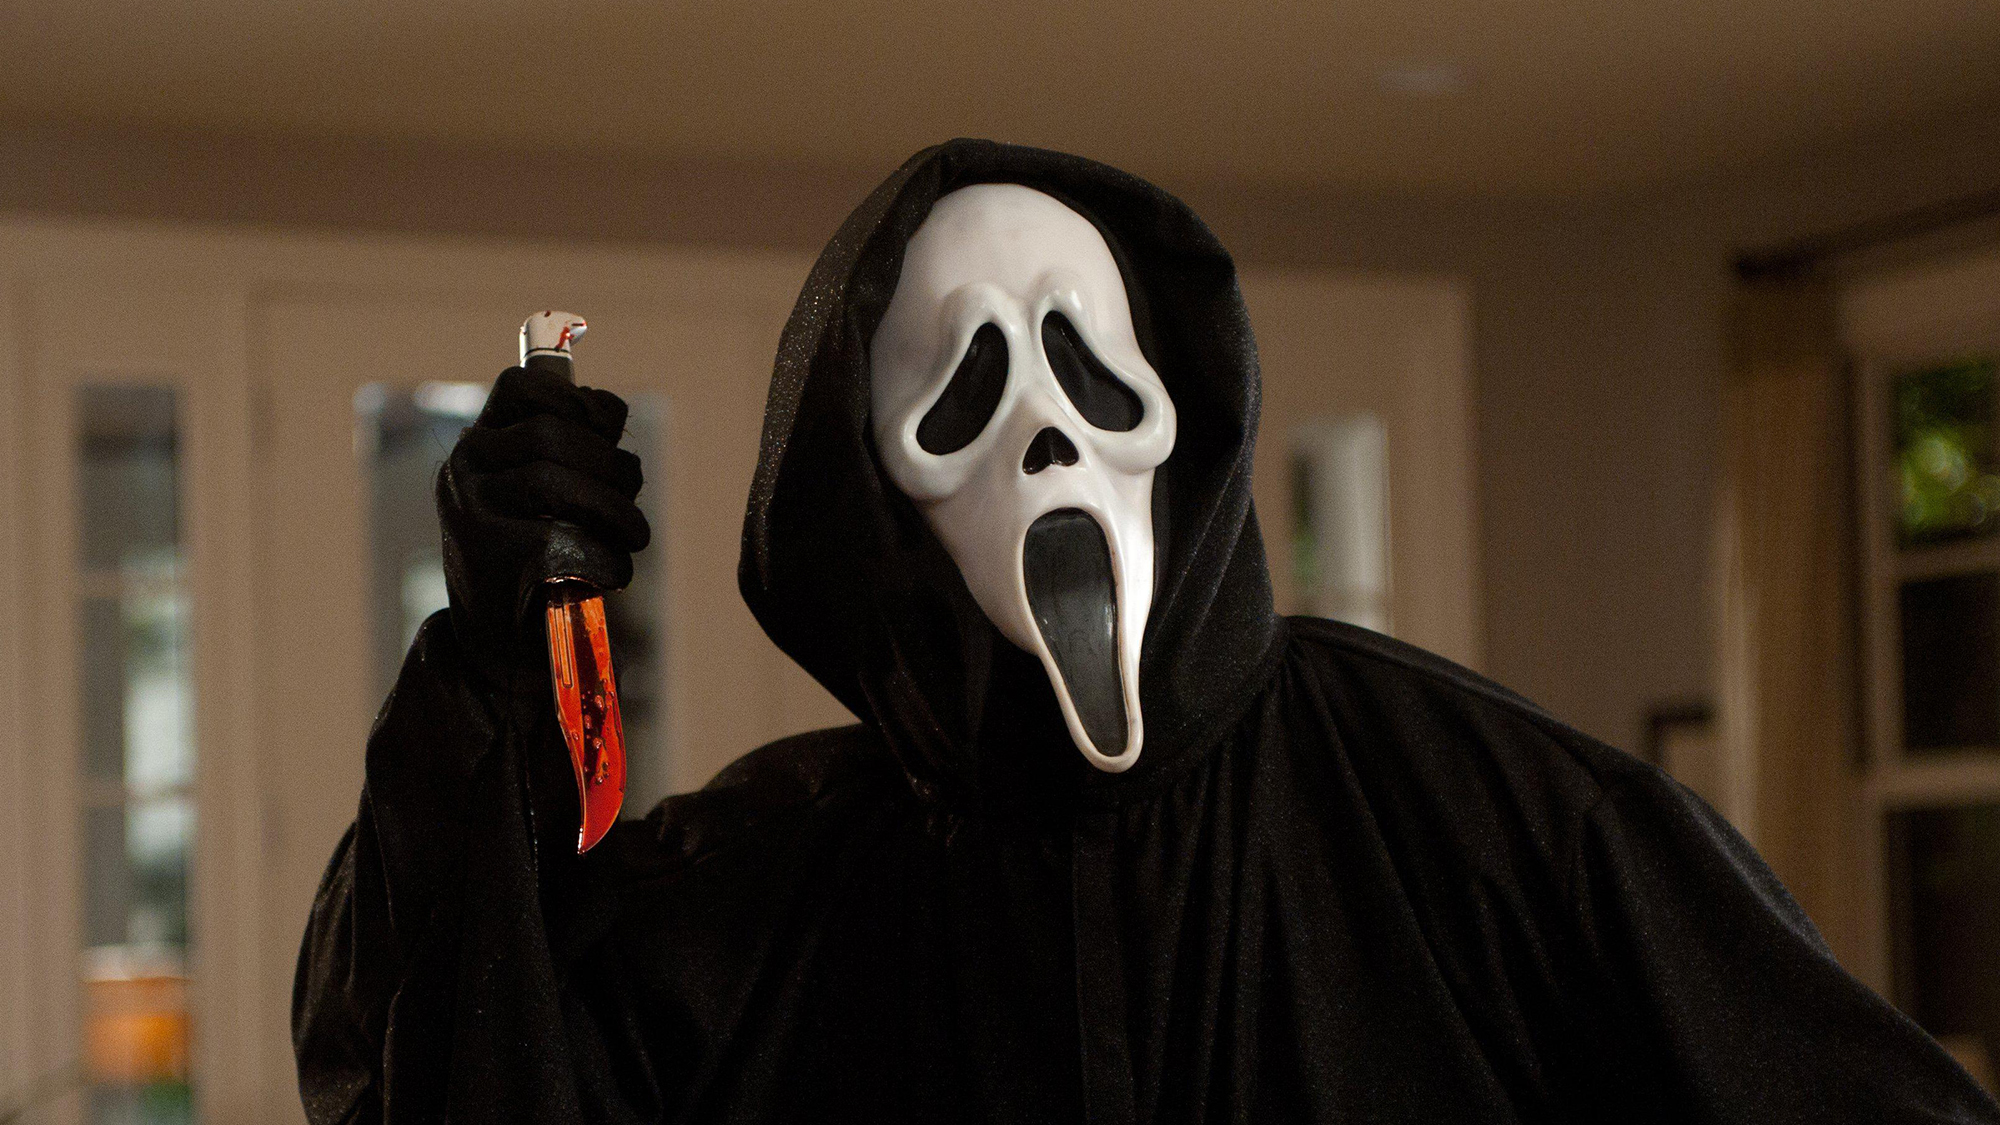 How to Watch 'Scream 6' - Is 'Scream 6' Streaming?